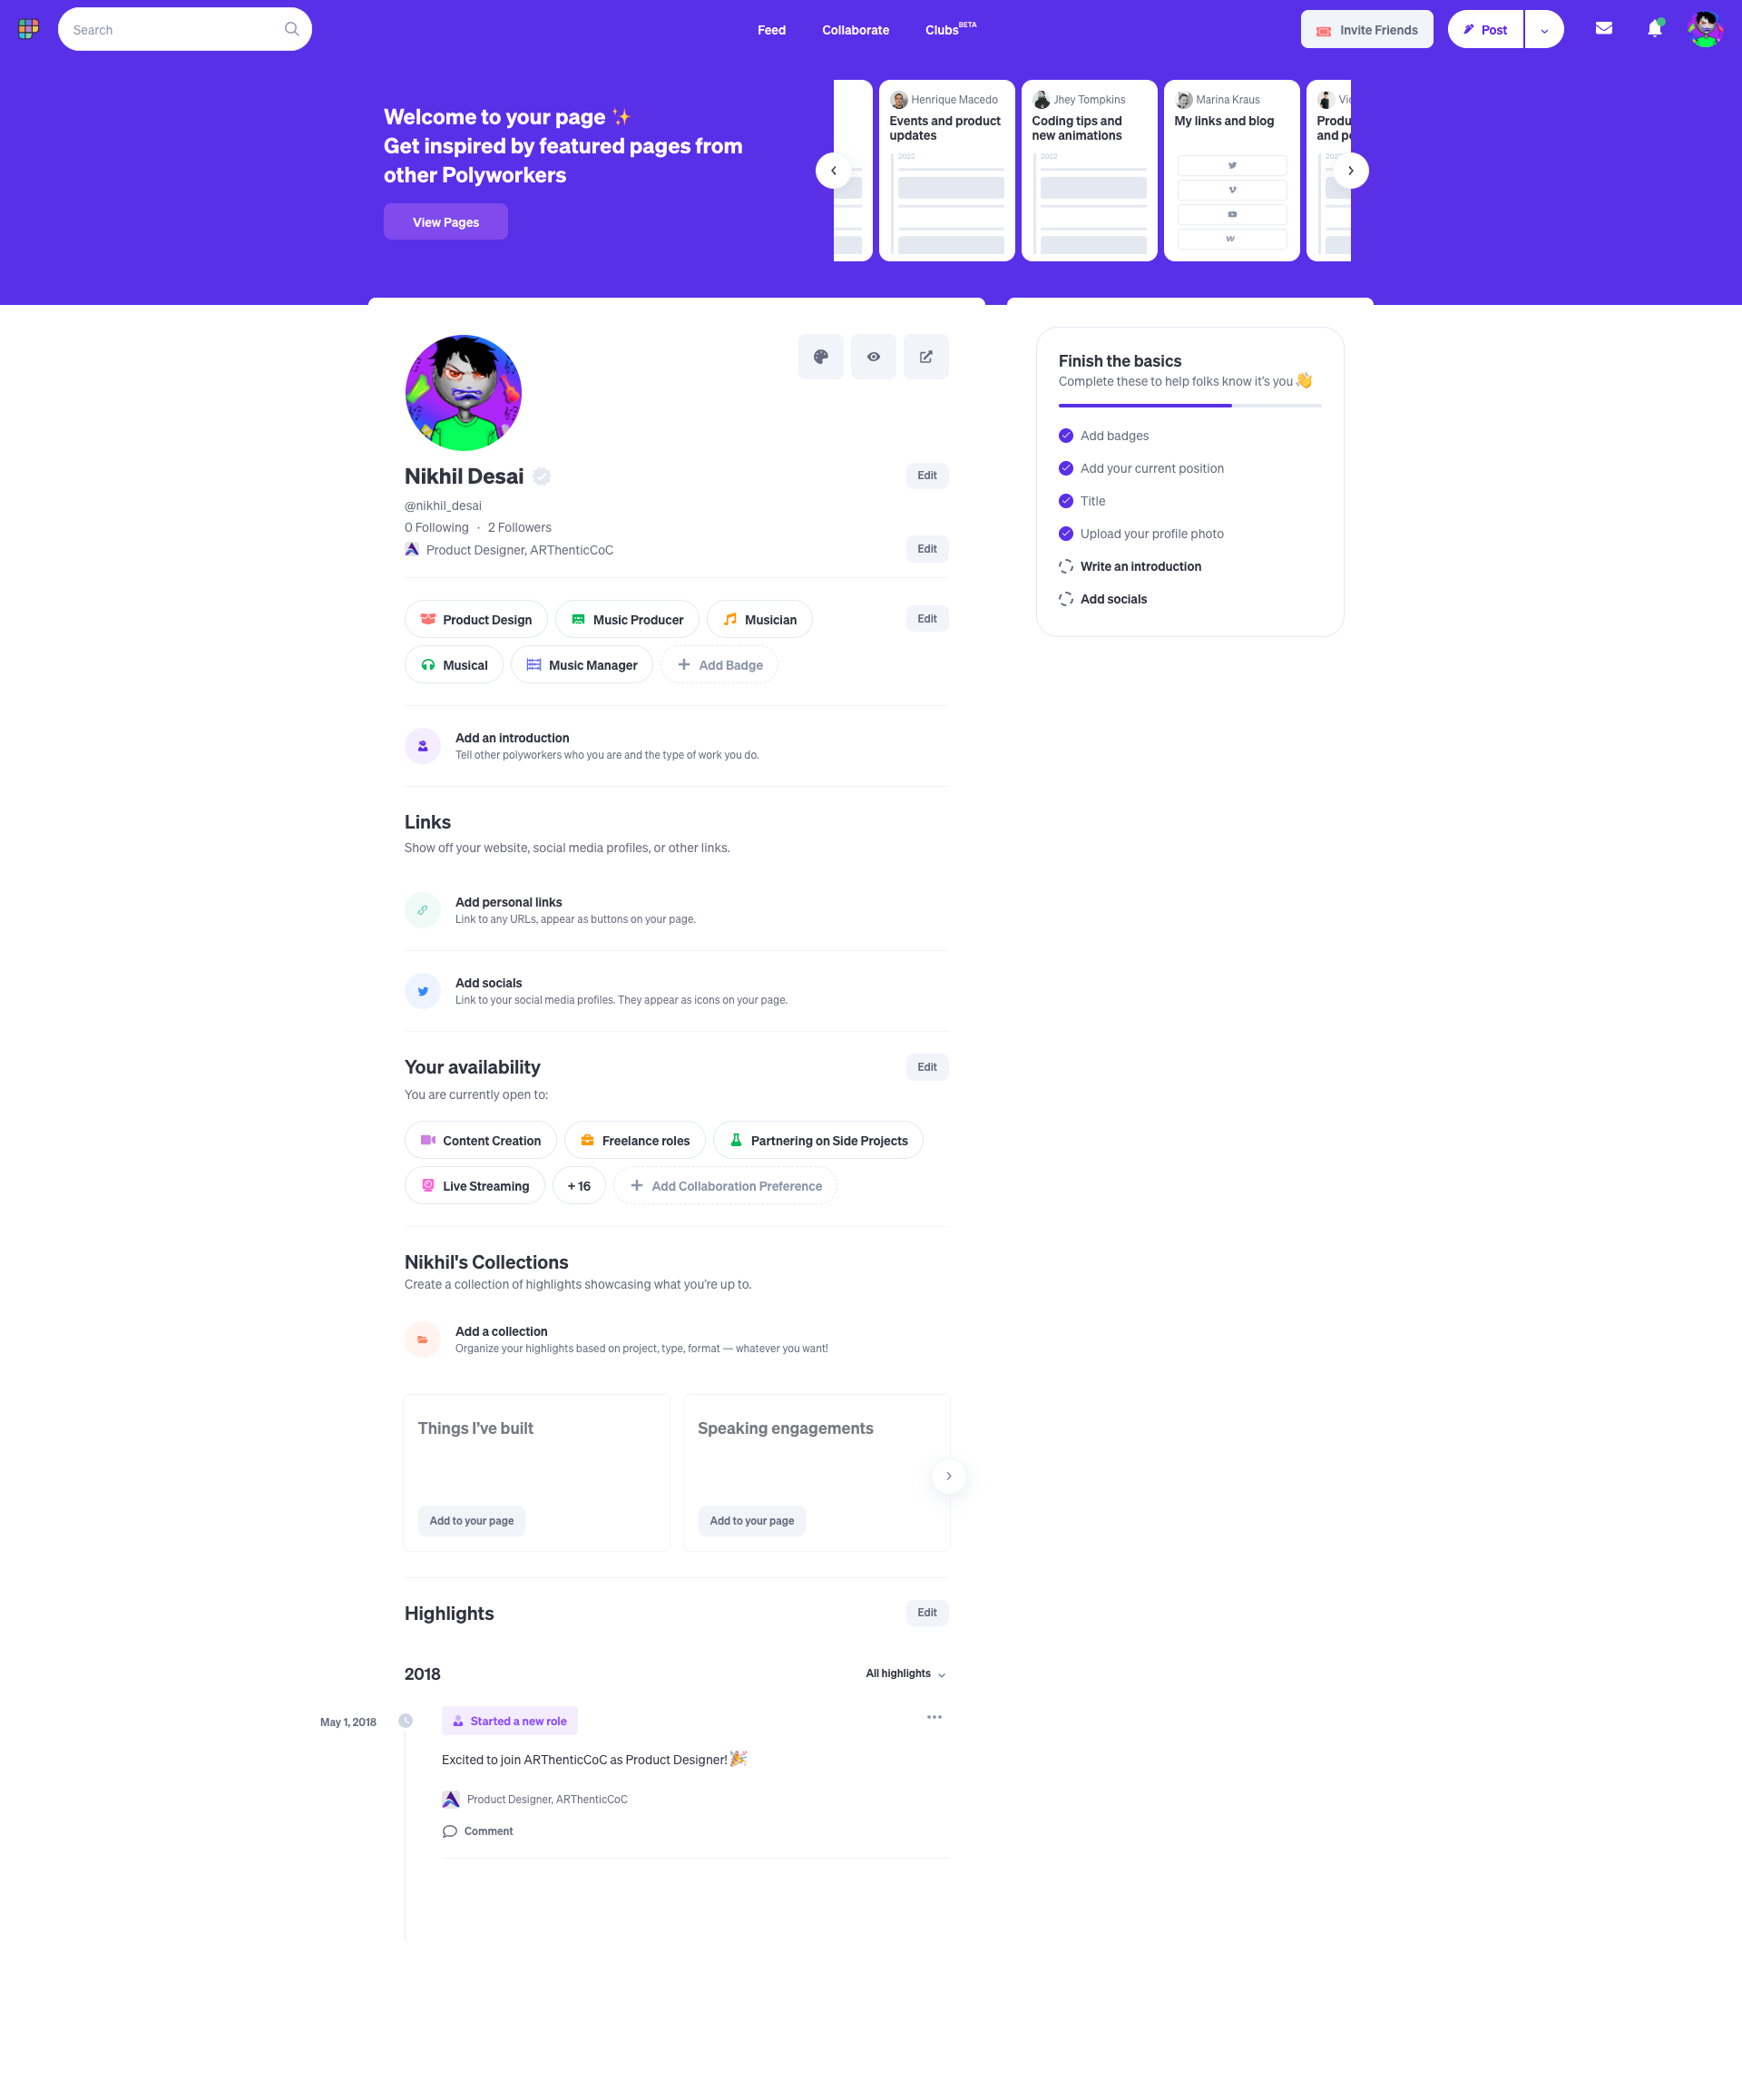 Here's a look at the basic account page, without many details.